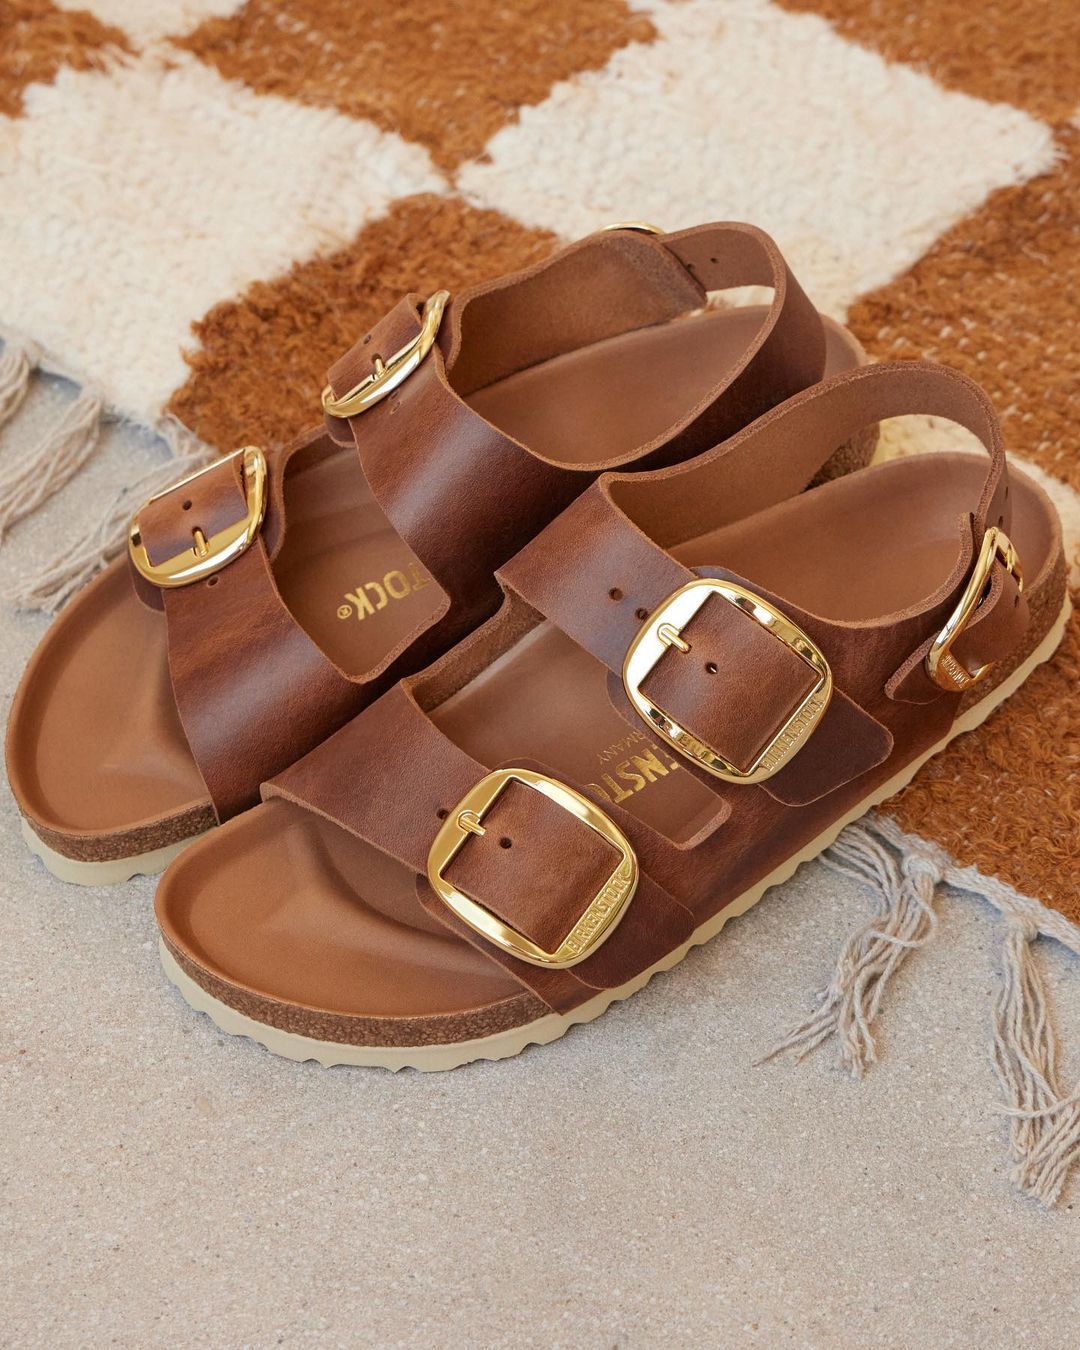 Birkenstock: Which sandals should you buy? | The Independent